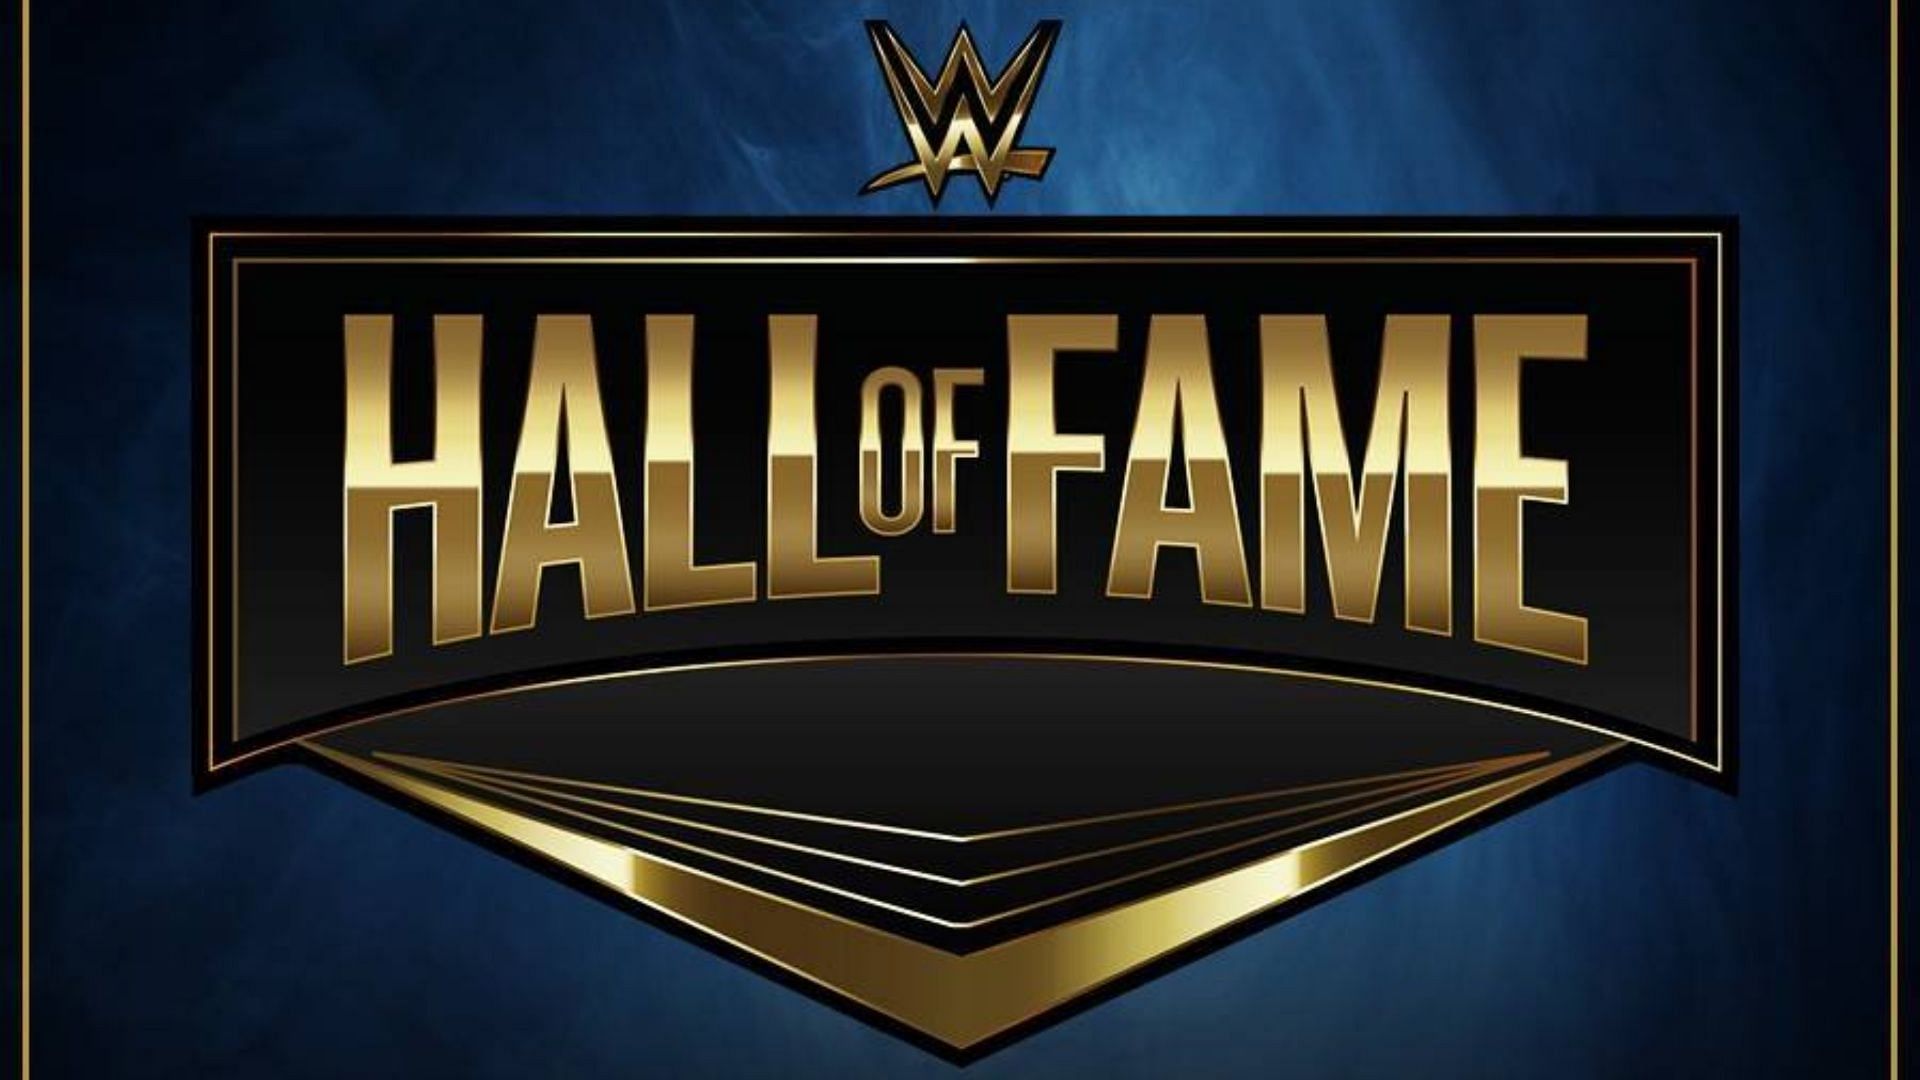 The WWE Hall of Fame was established on March 22, 1993.